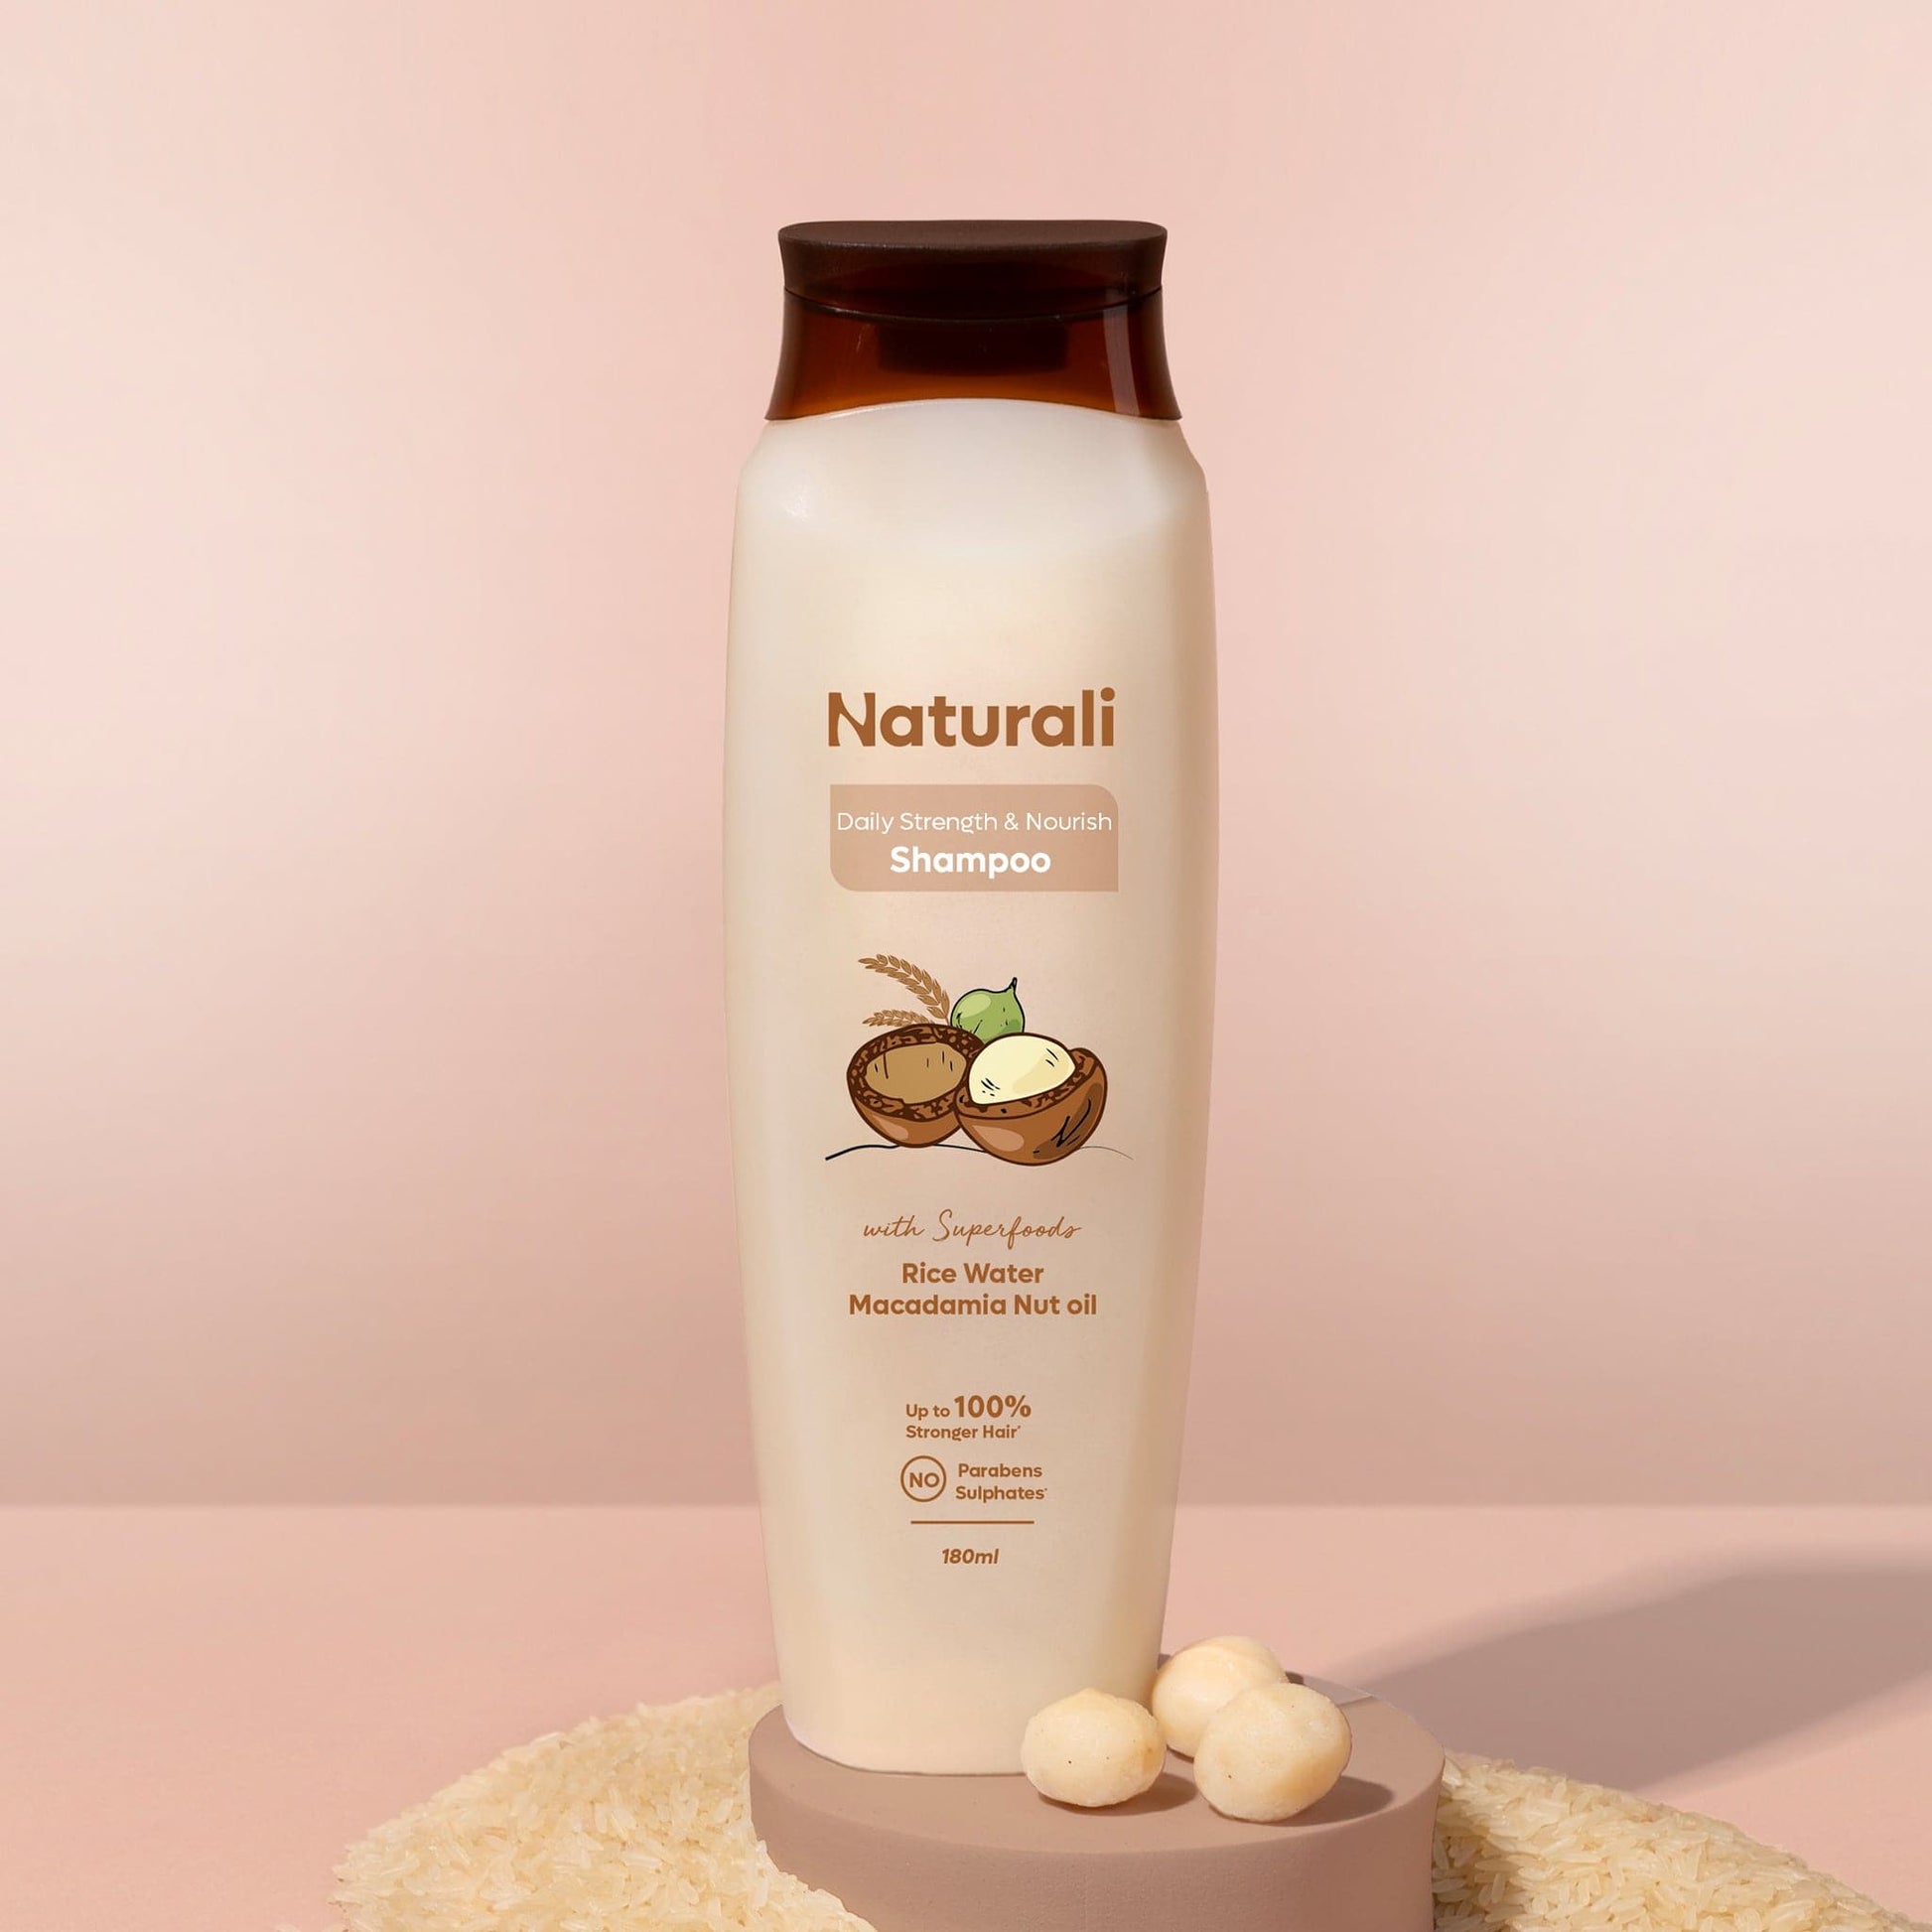 Daily Strength & Nourish Shampoo with Rice Water and Macadamia Nut Oil